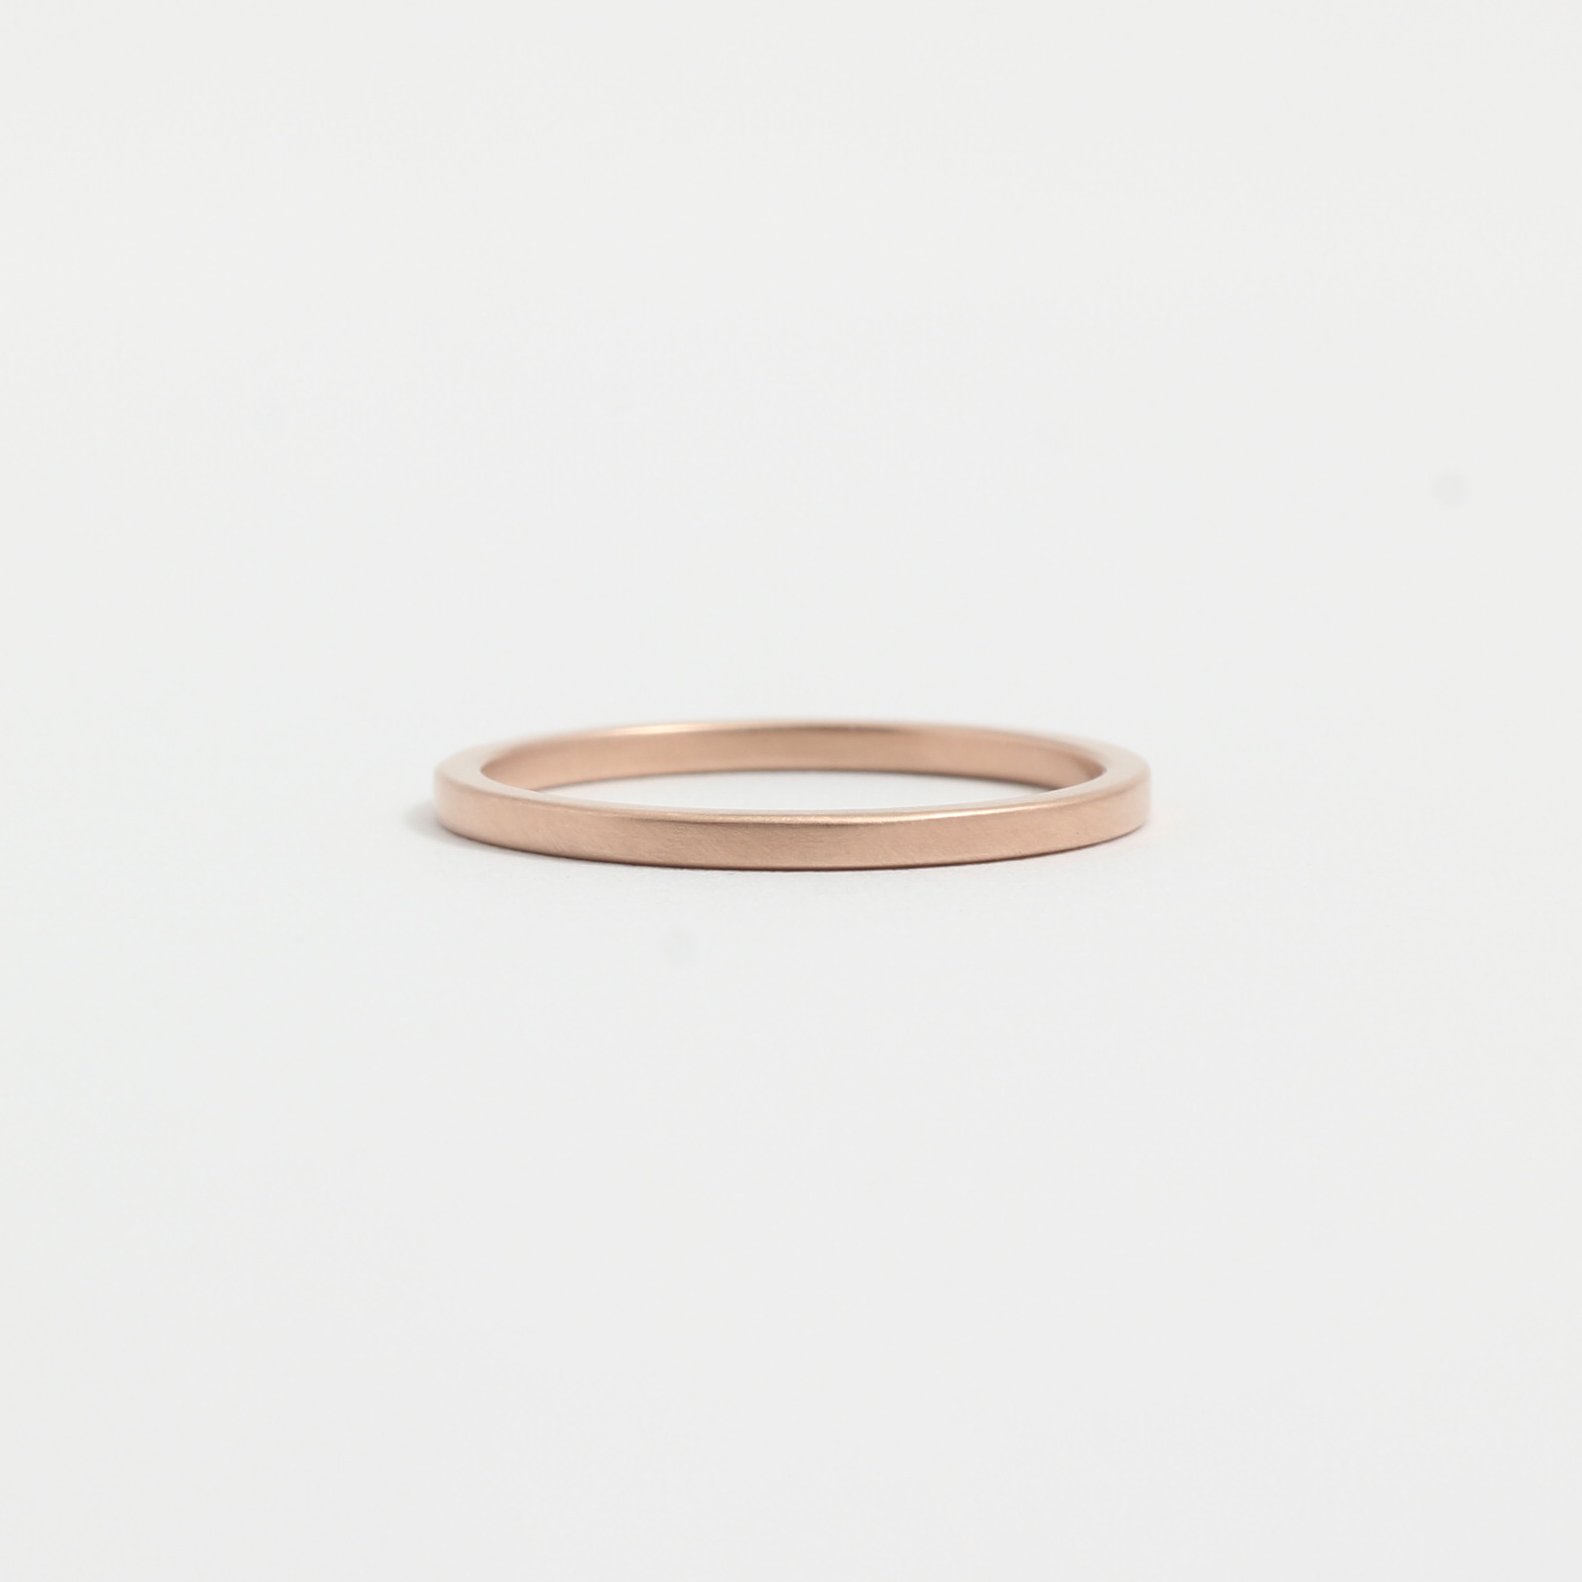 simple gold wedding band from Ash Hilton